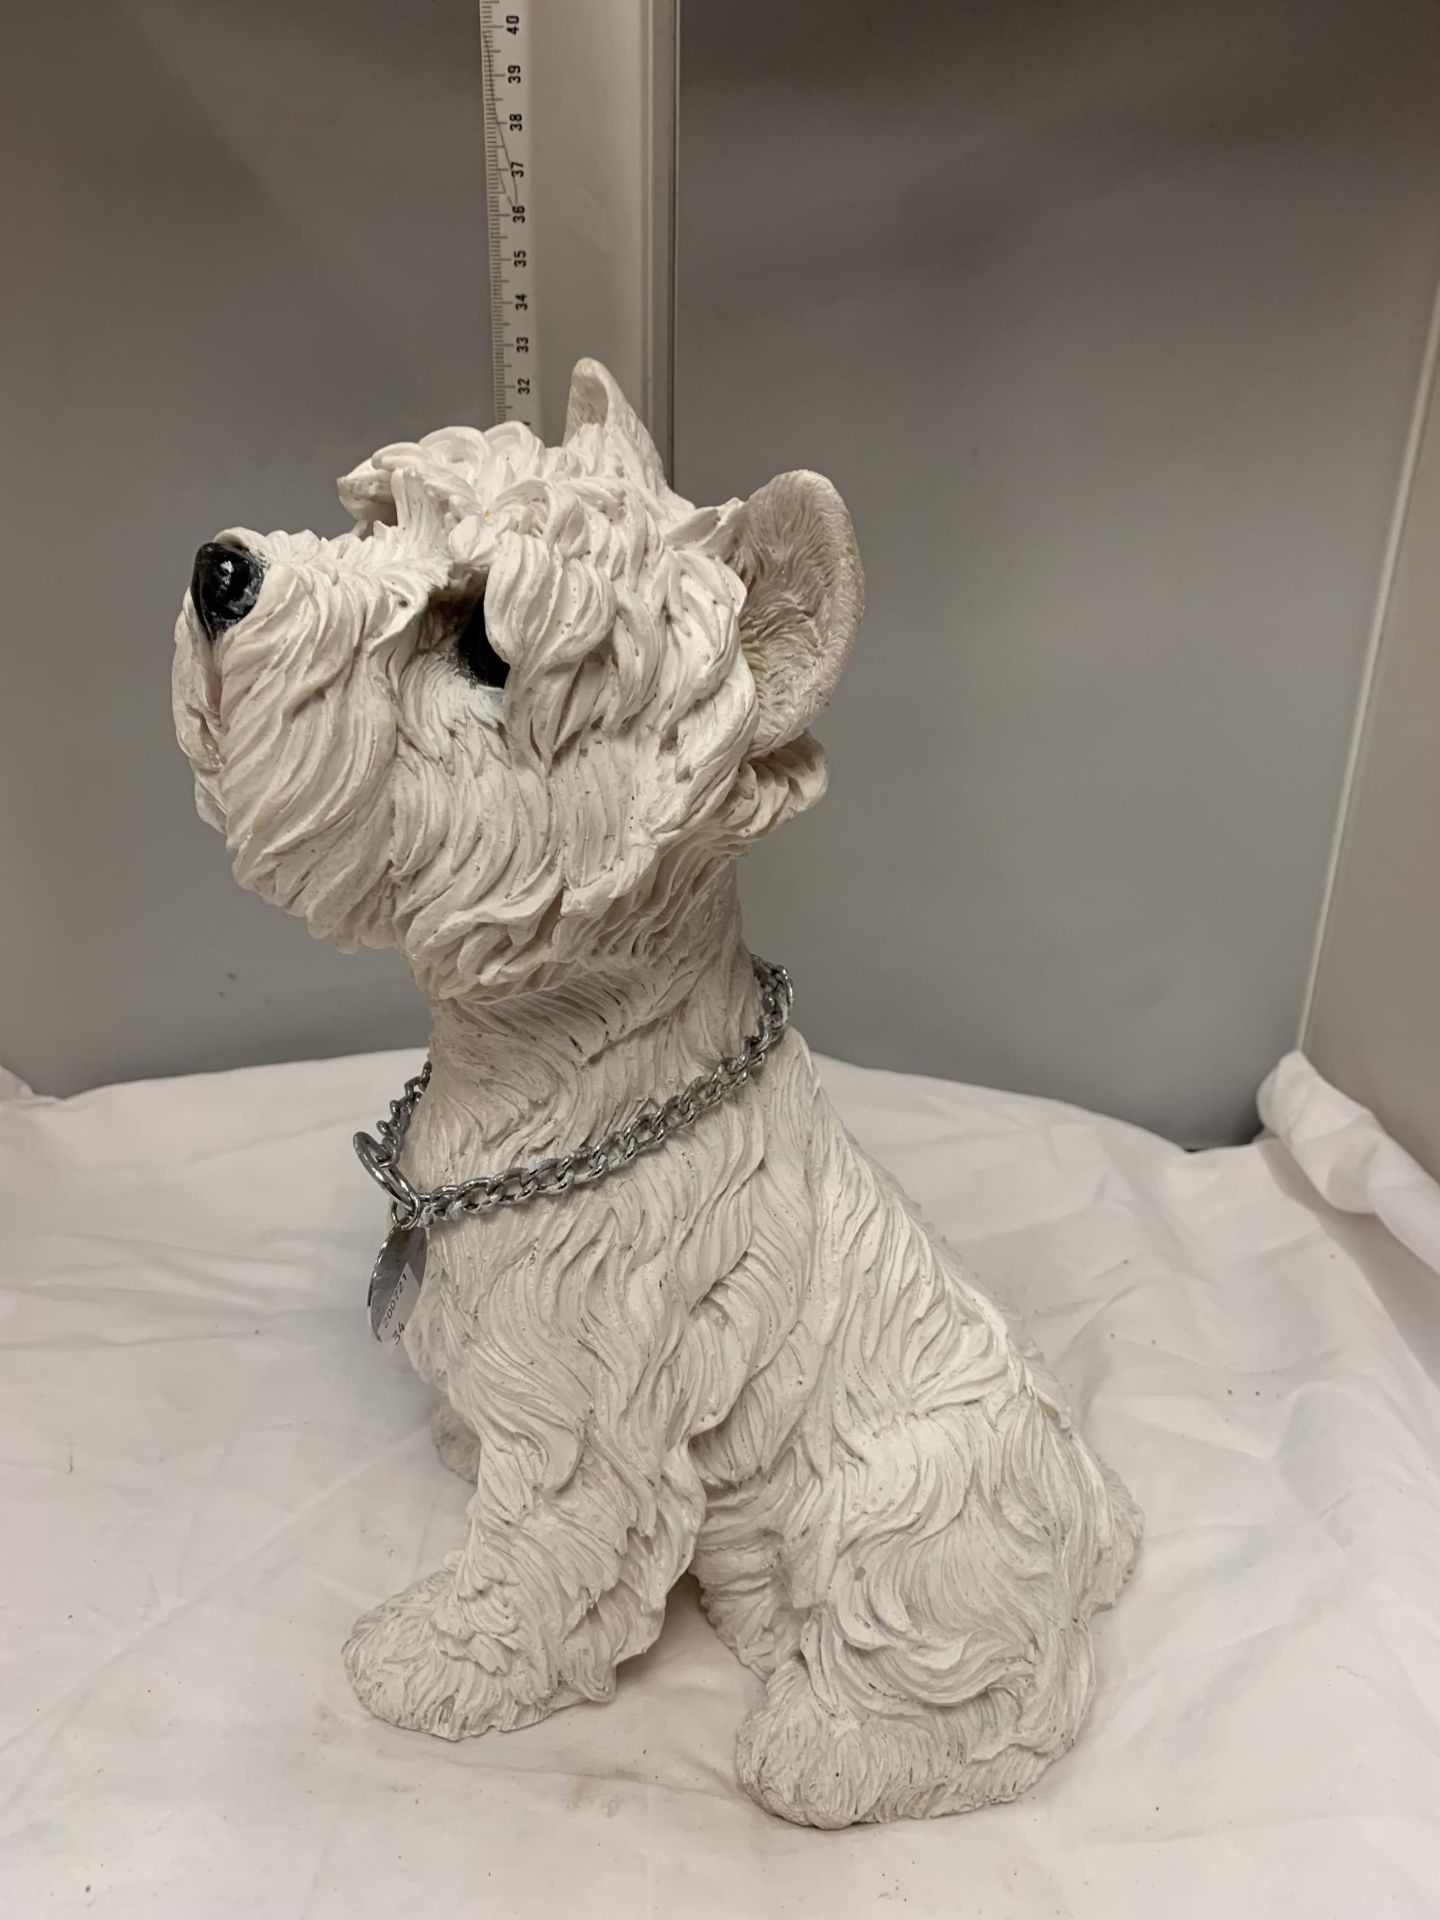 A LARGE CERAMIC WEST HIGHLAND TERRIER WITH A NECK CHAIN - Image 4 of 4